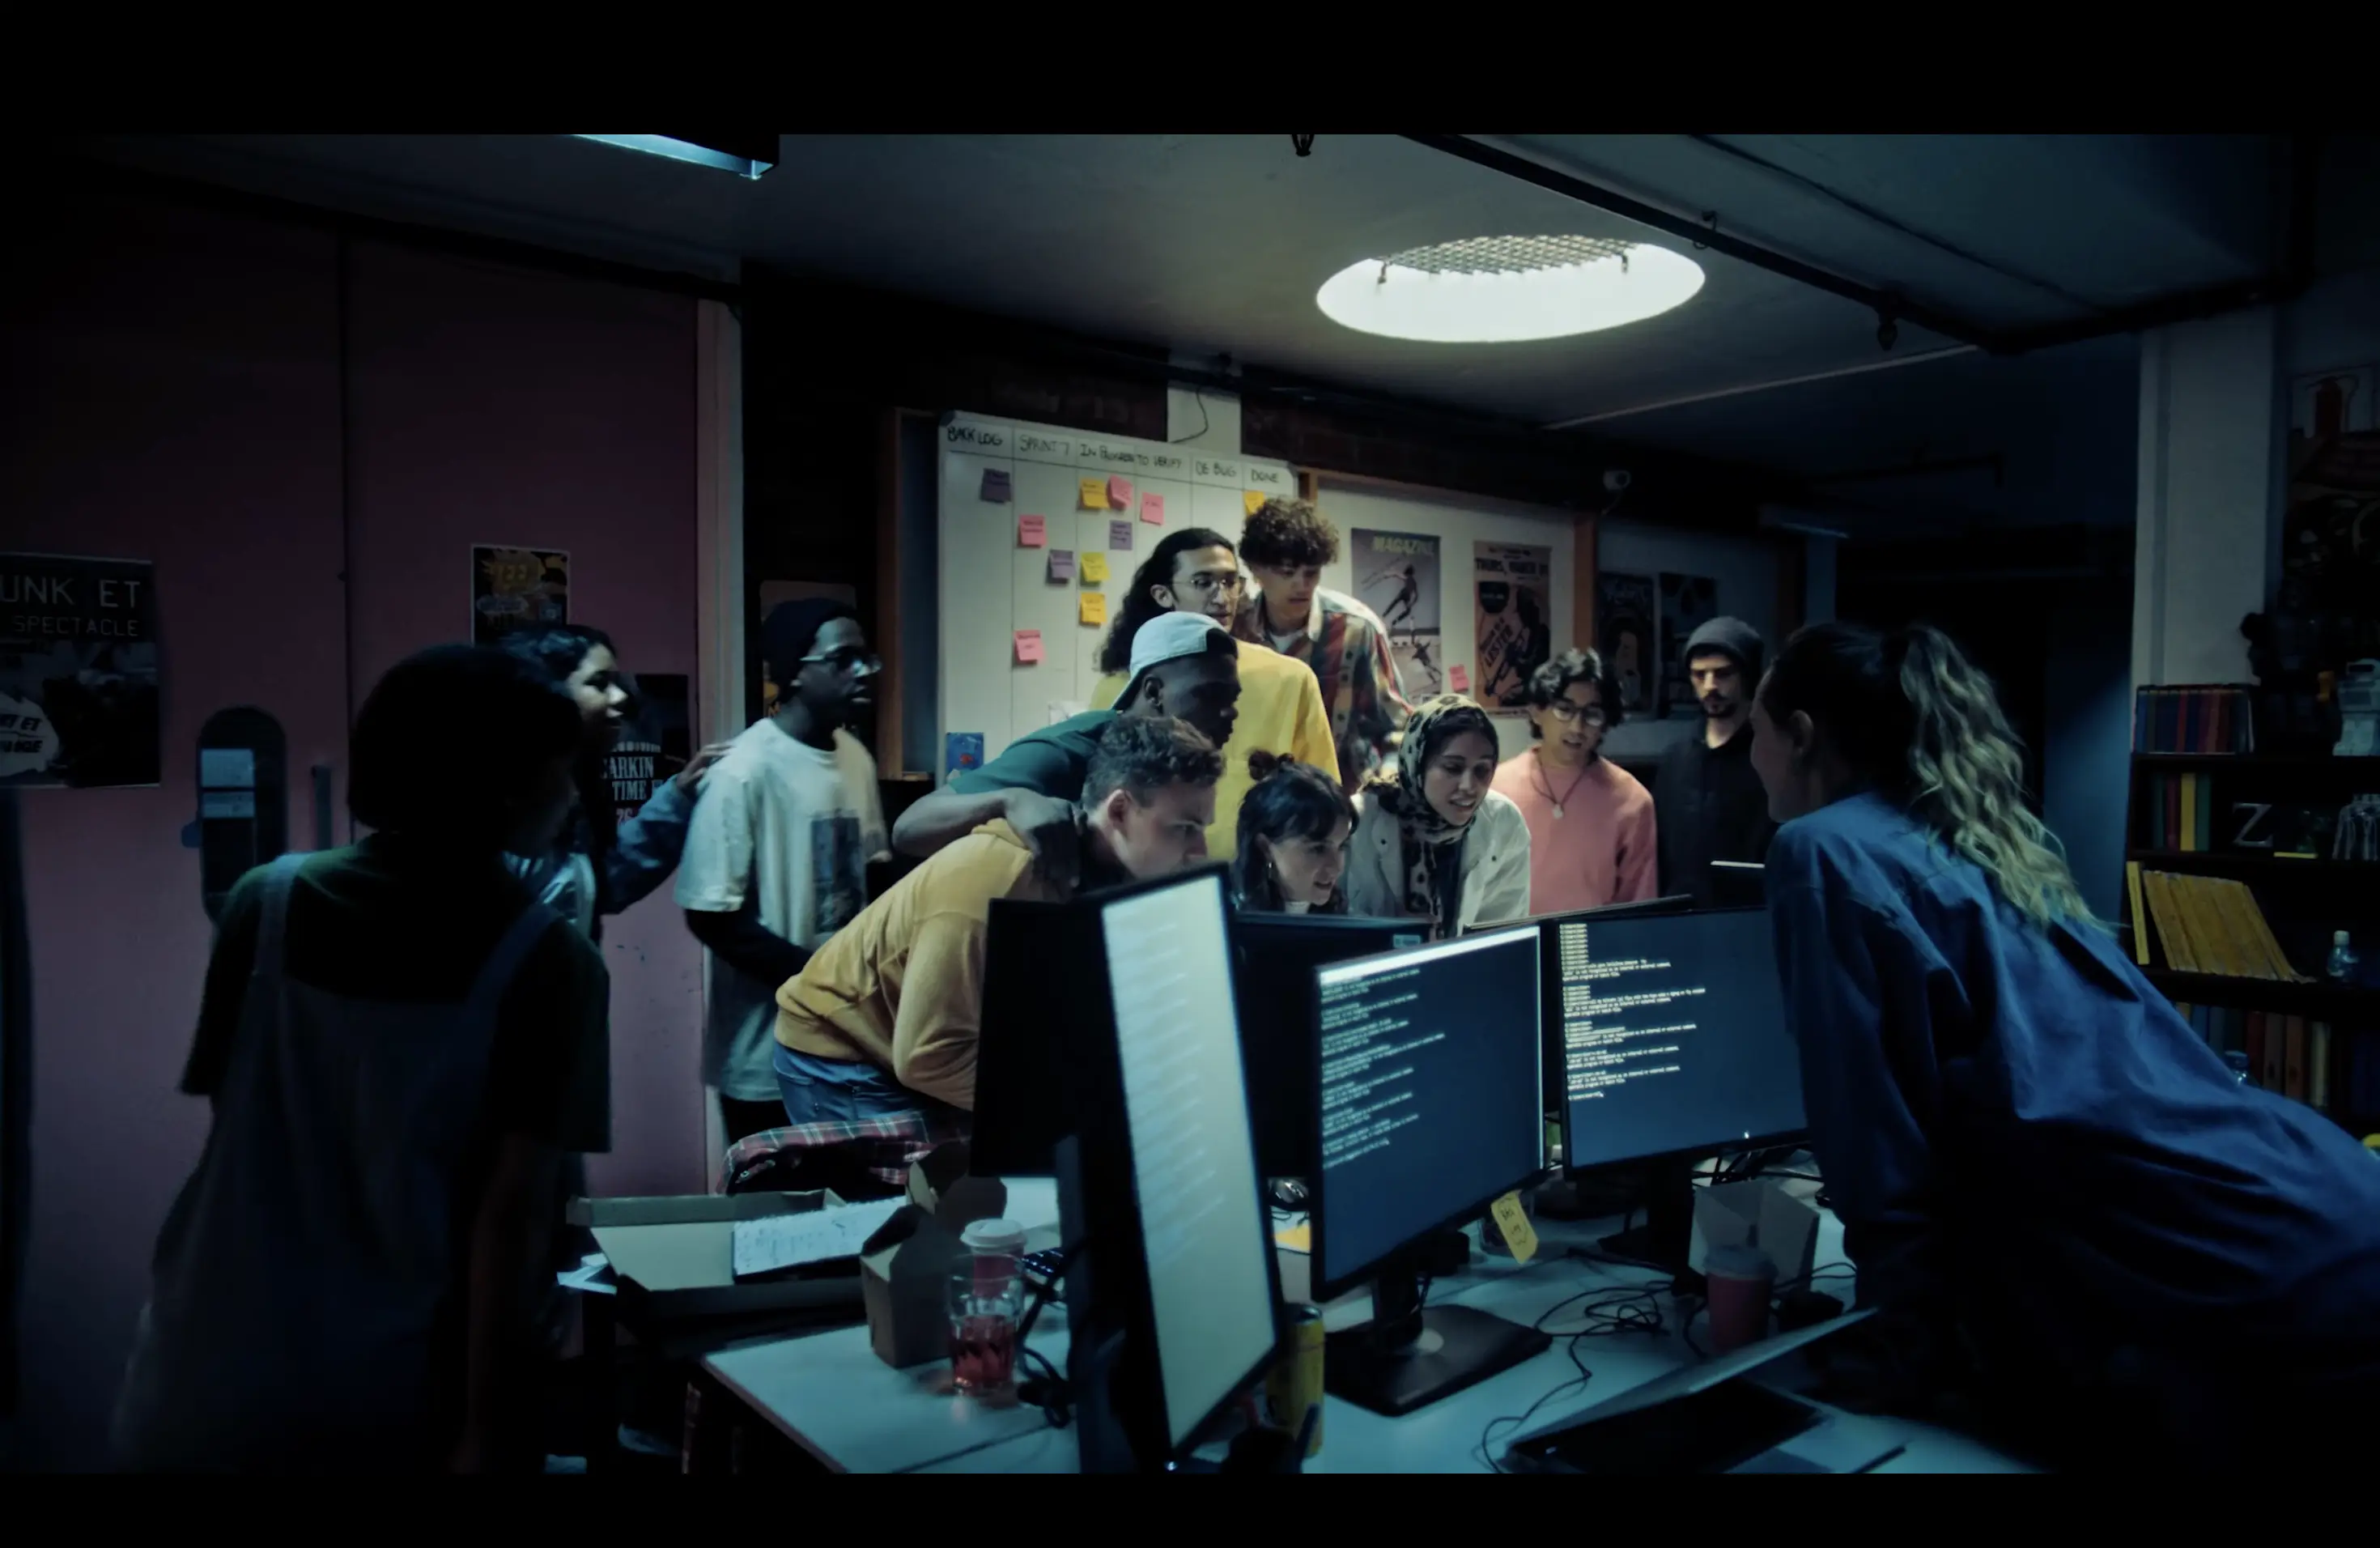 Programmers gathered around computers